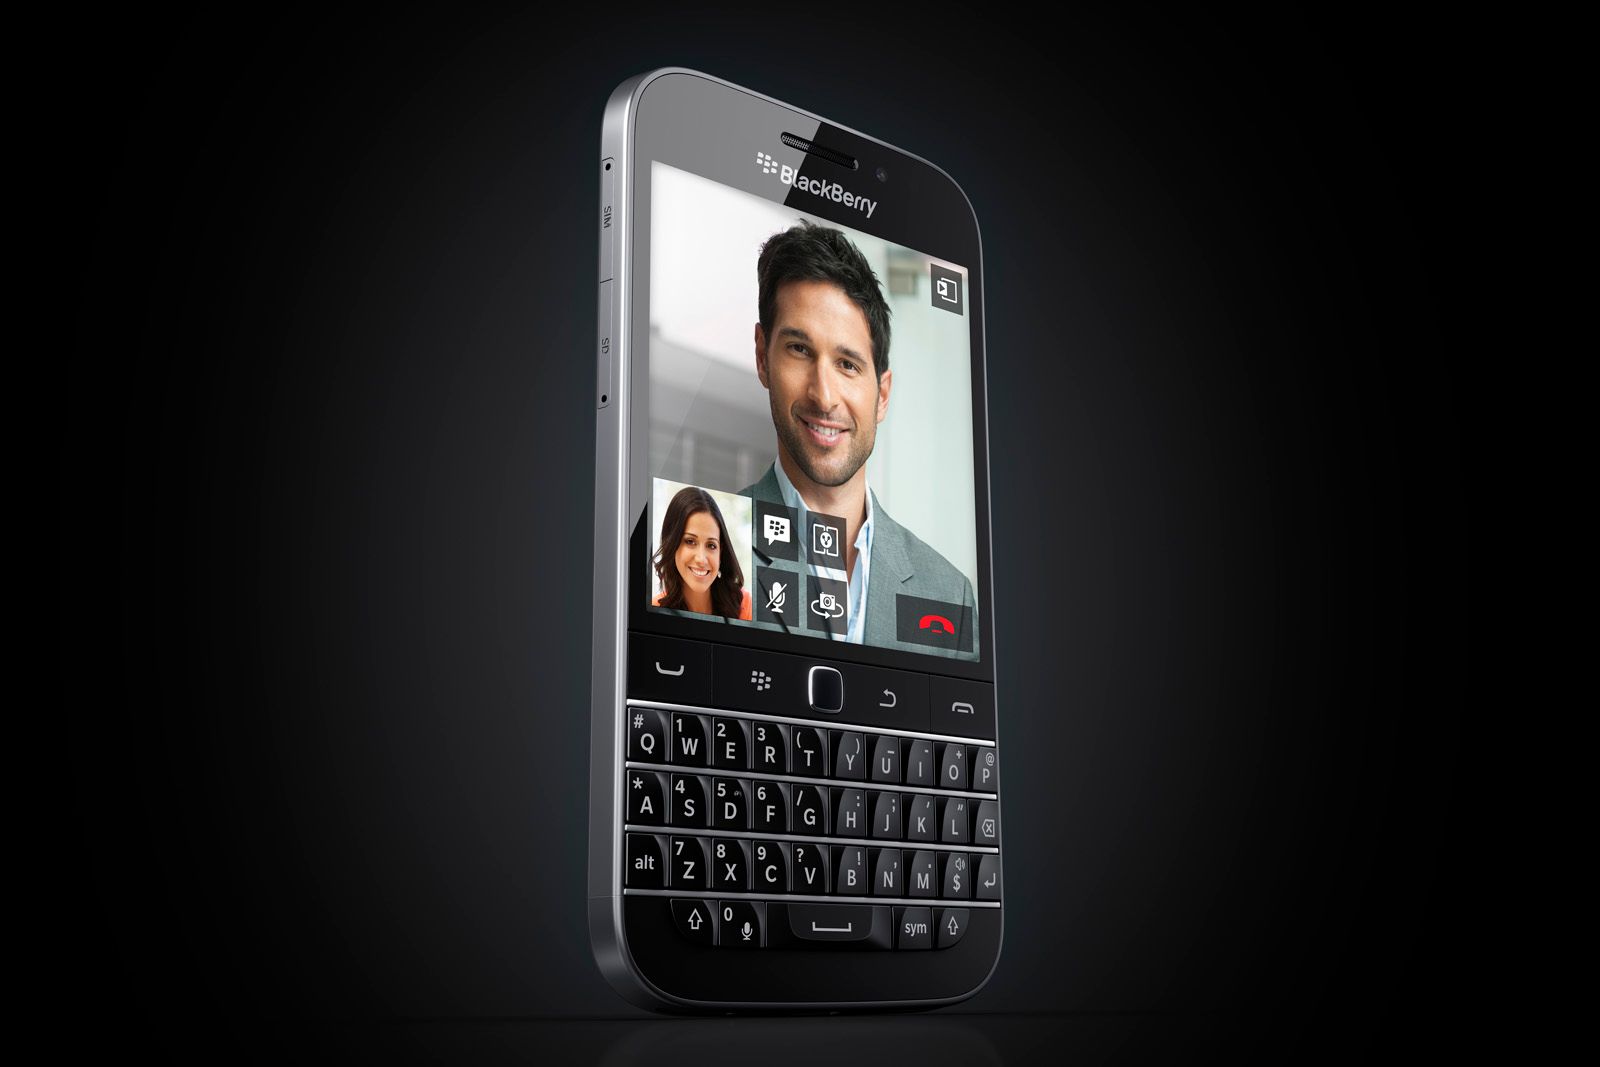 blackberry classic officially launches to upgrade the bold experience image 1